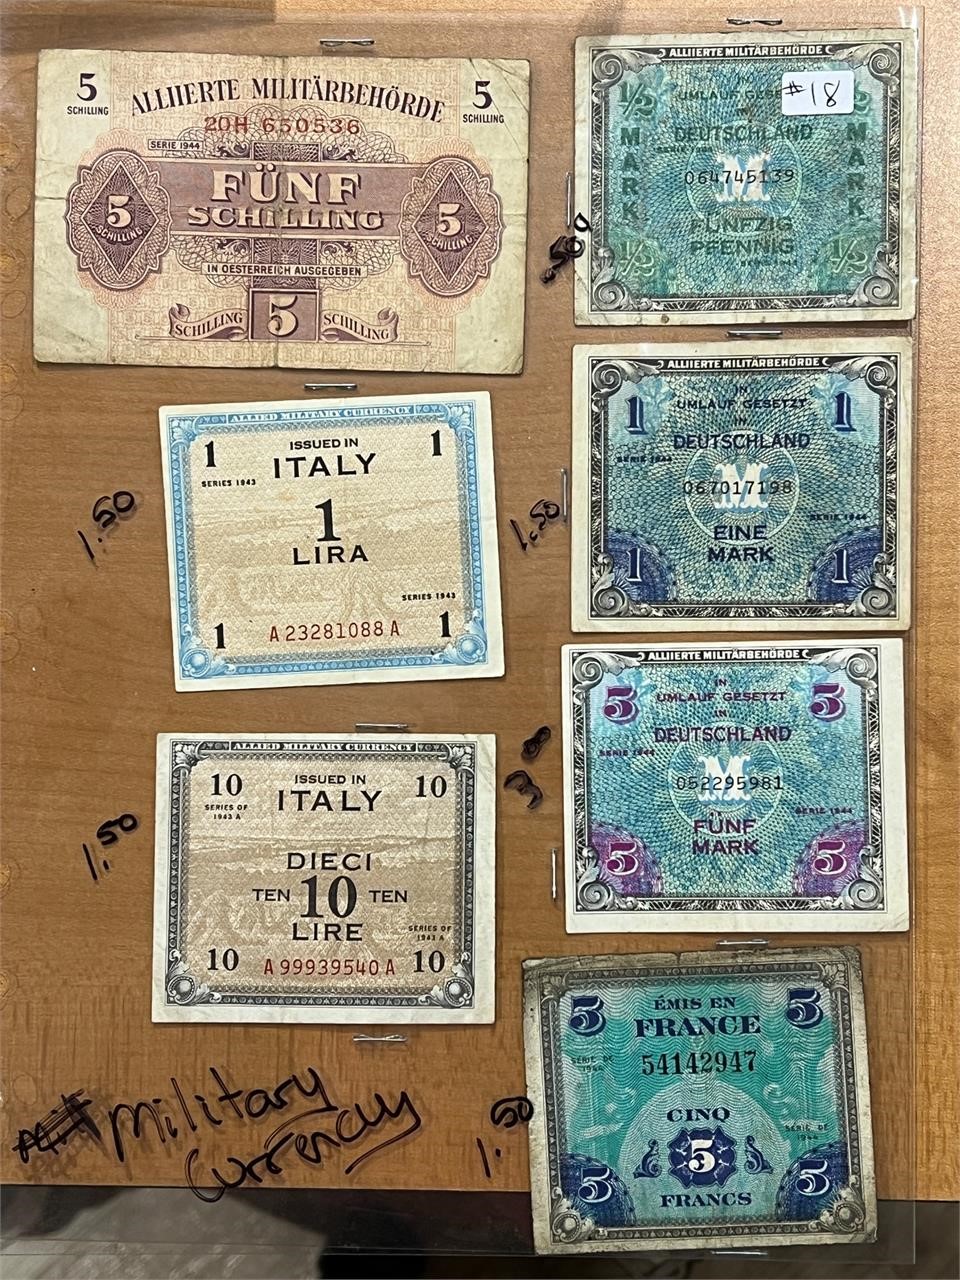 7- Foreign Military Currency Notes